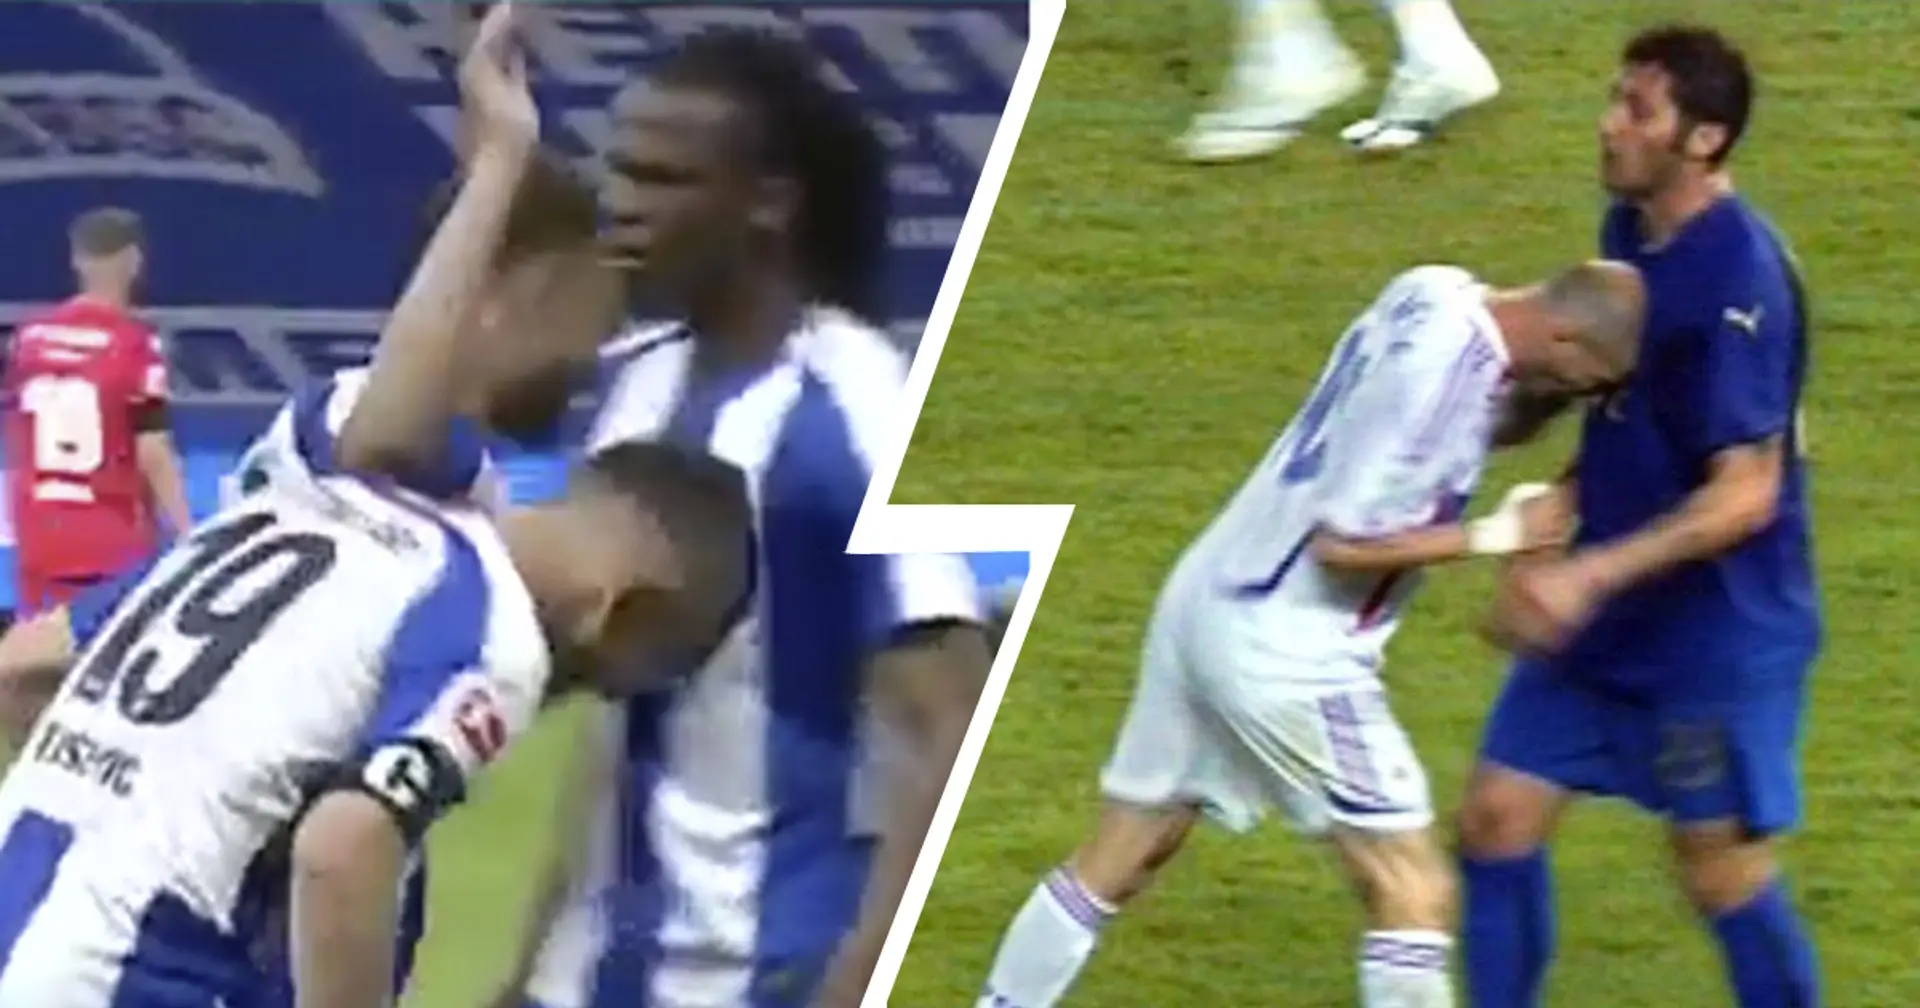 Celebration of the day: Hertha's Vedad Ibisevic does Zidane's famous headbutt after scoring a goal